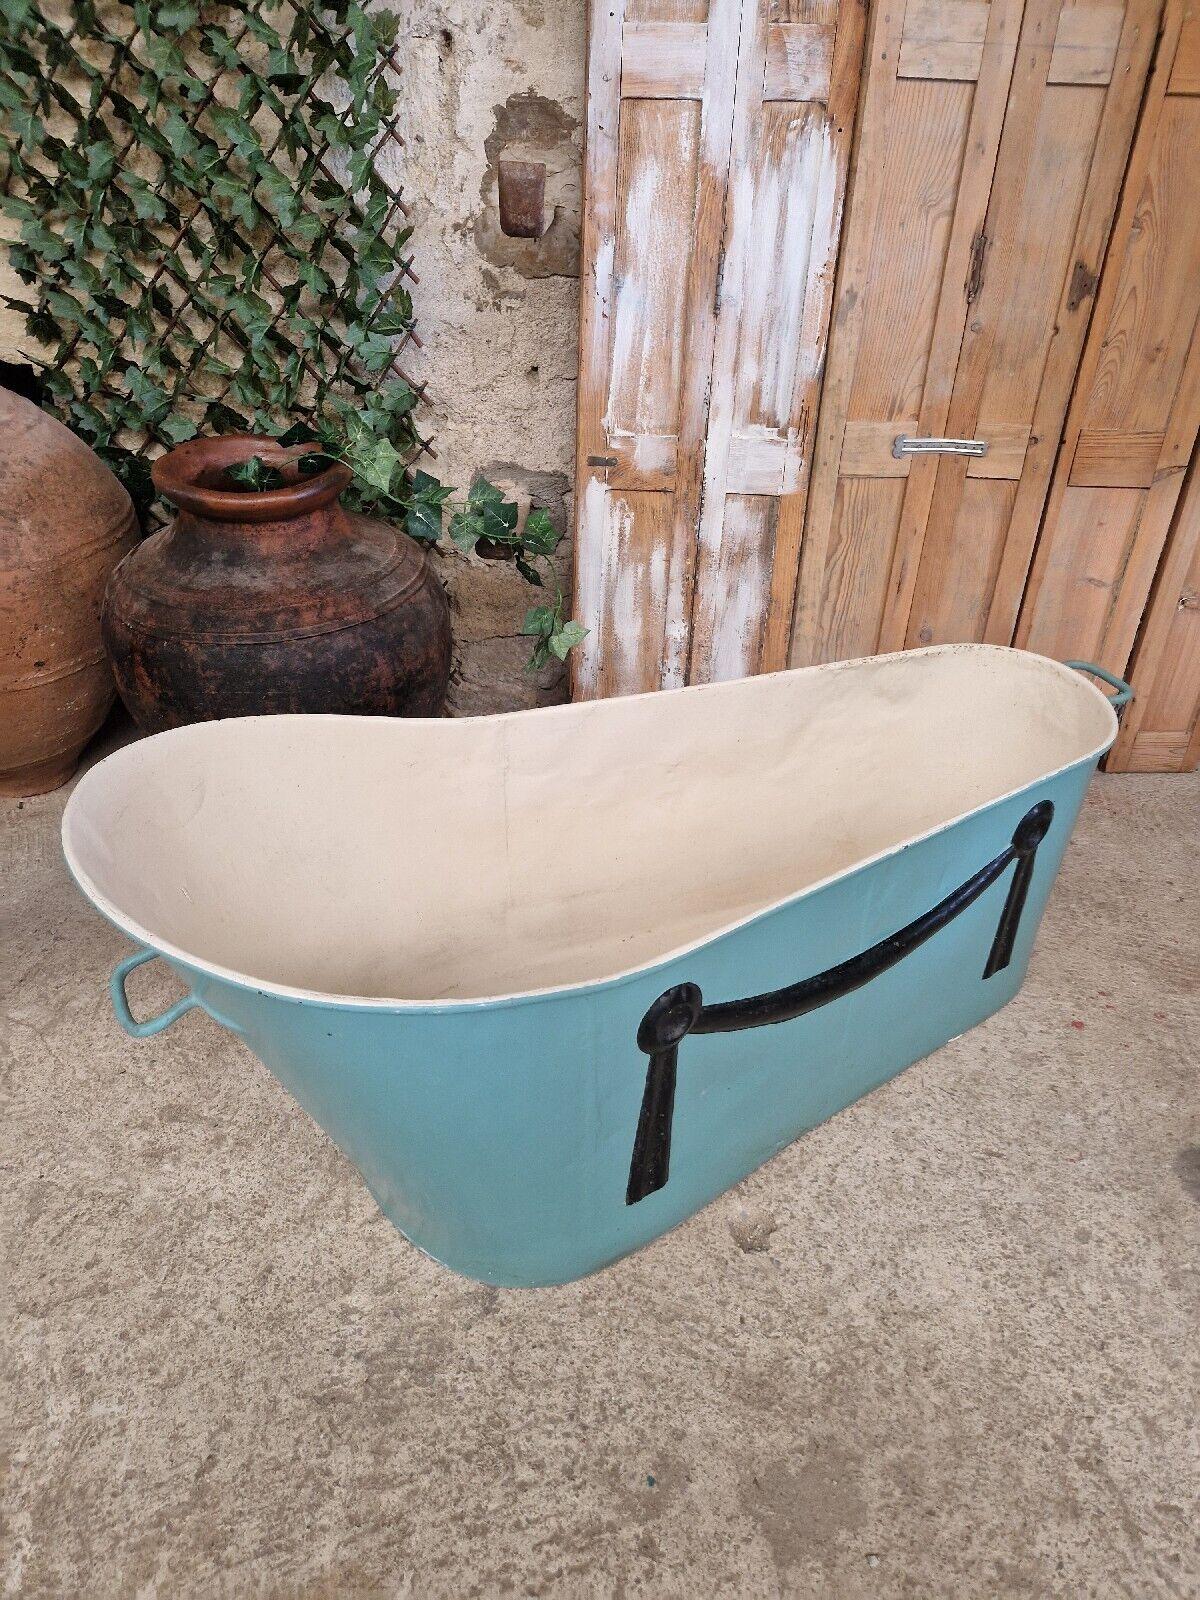 Antique Zinc Bathtub

Directoire Style

Highly Decorative 

French Blue Lacquer

Sourced from a Chateau in Toulouse

Good Condition

French Origin

Could be used indoor or Outdoor for a variety of uses

Circa 19th Century



Unique